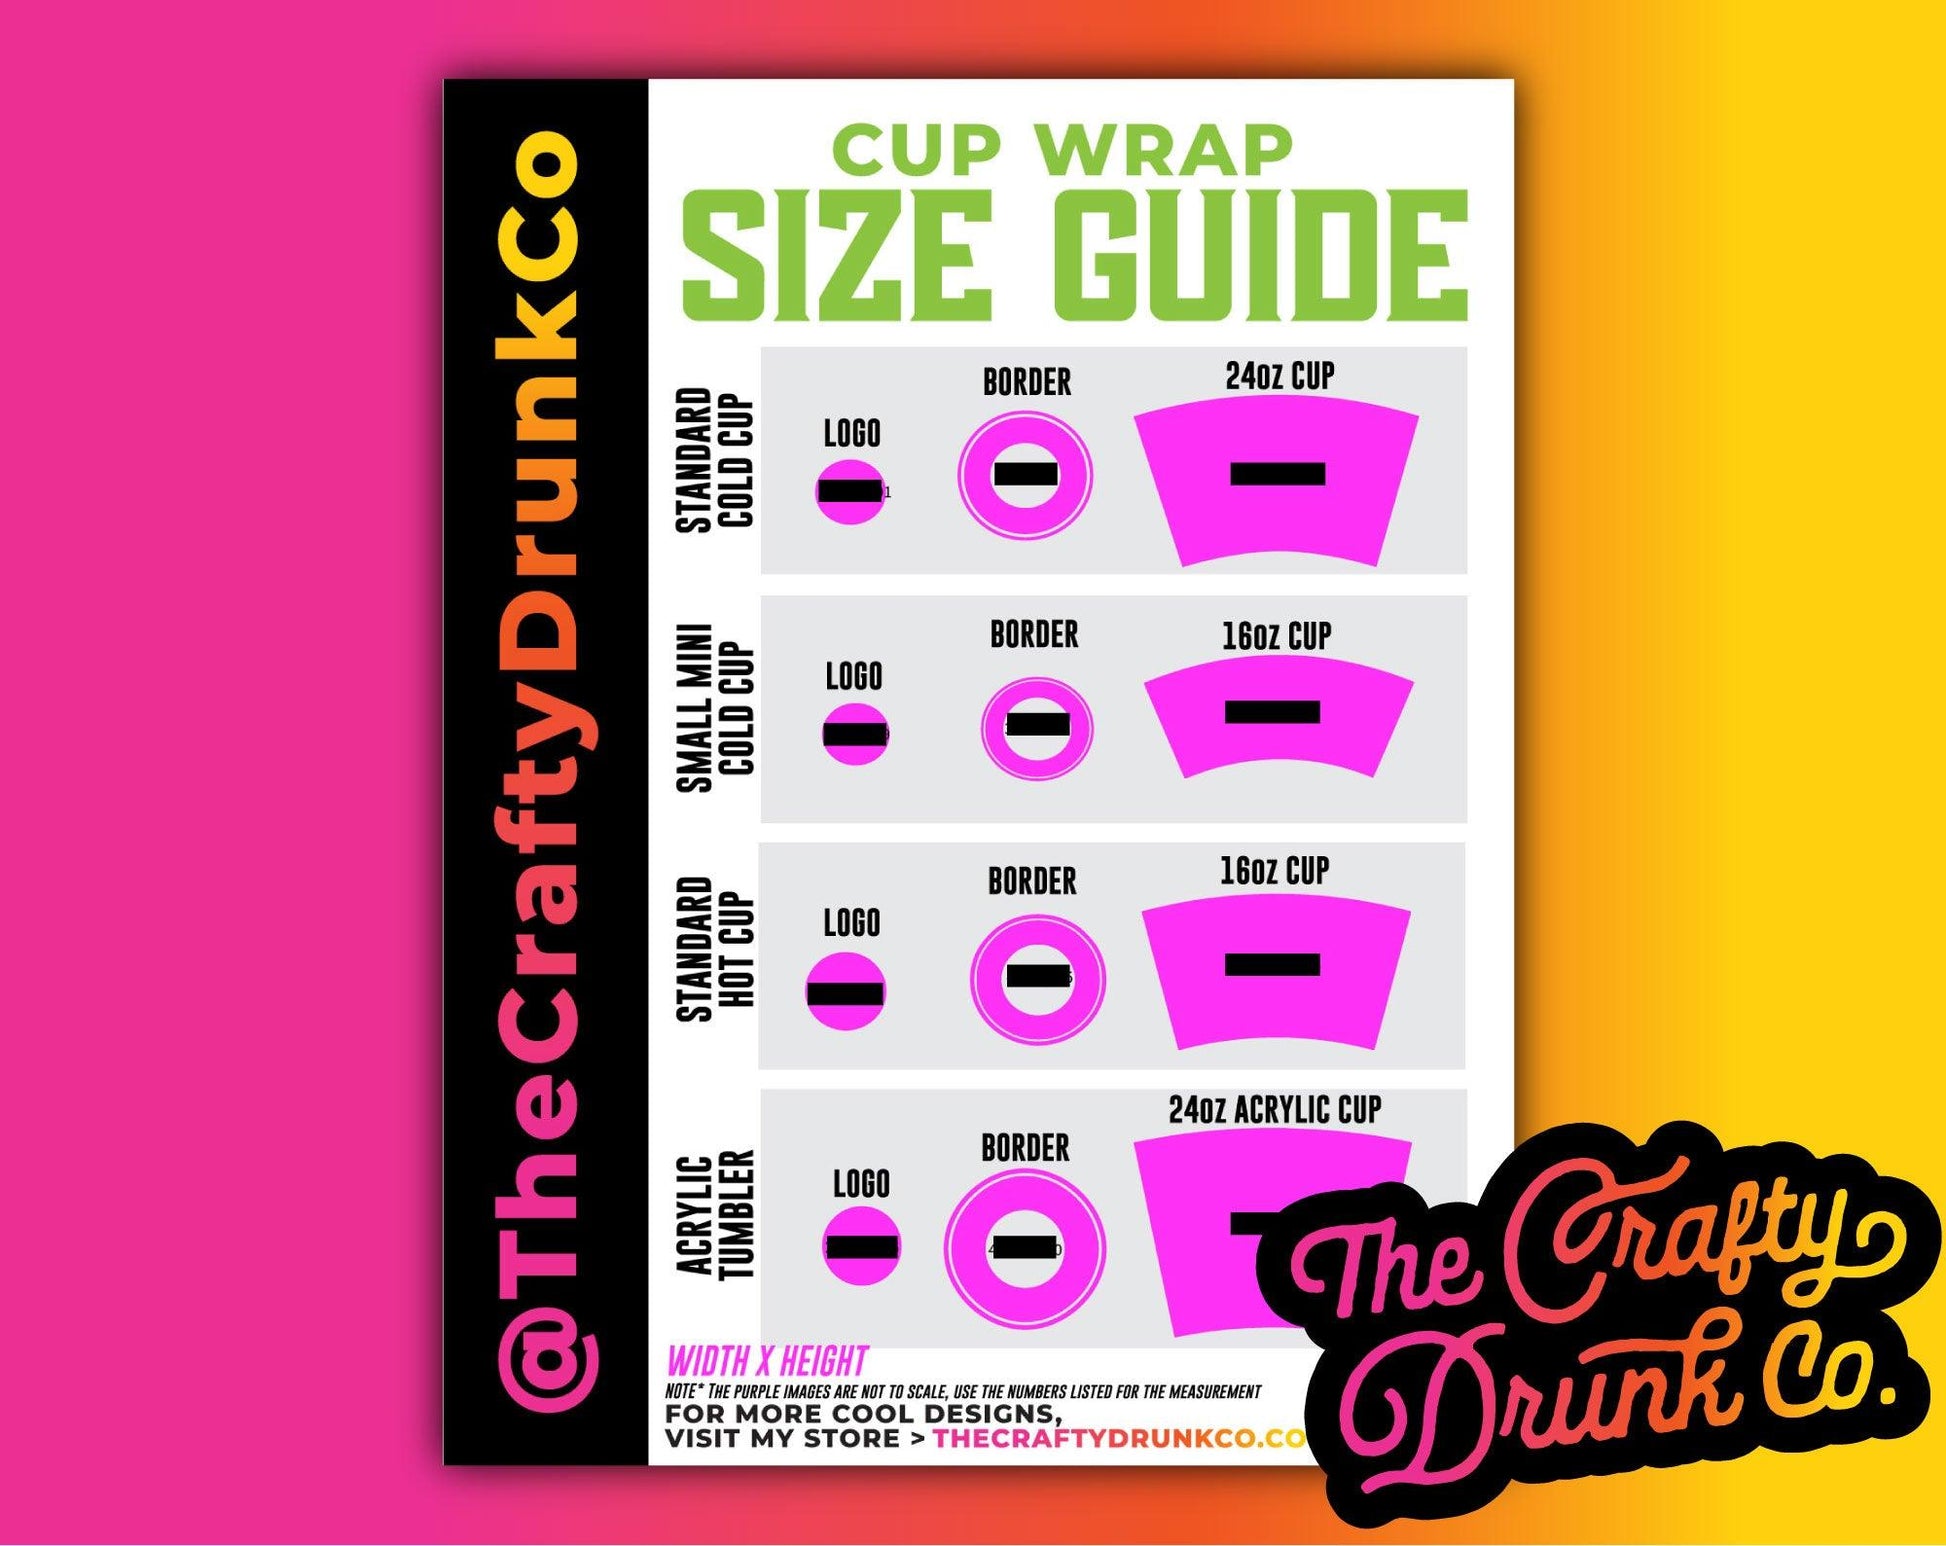 One (1)MYSTERY Cold Cup Wrap $1 Deal (0707) - $1.00 : VS